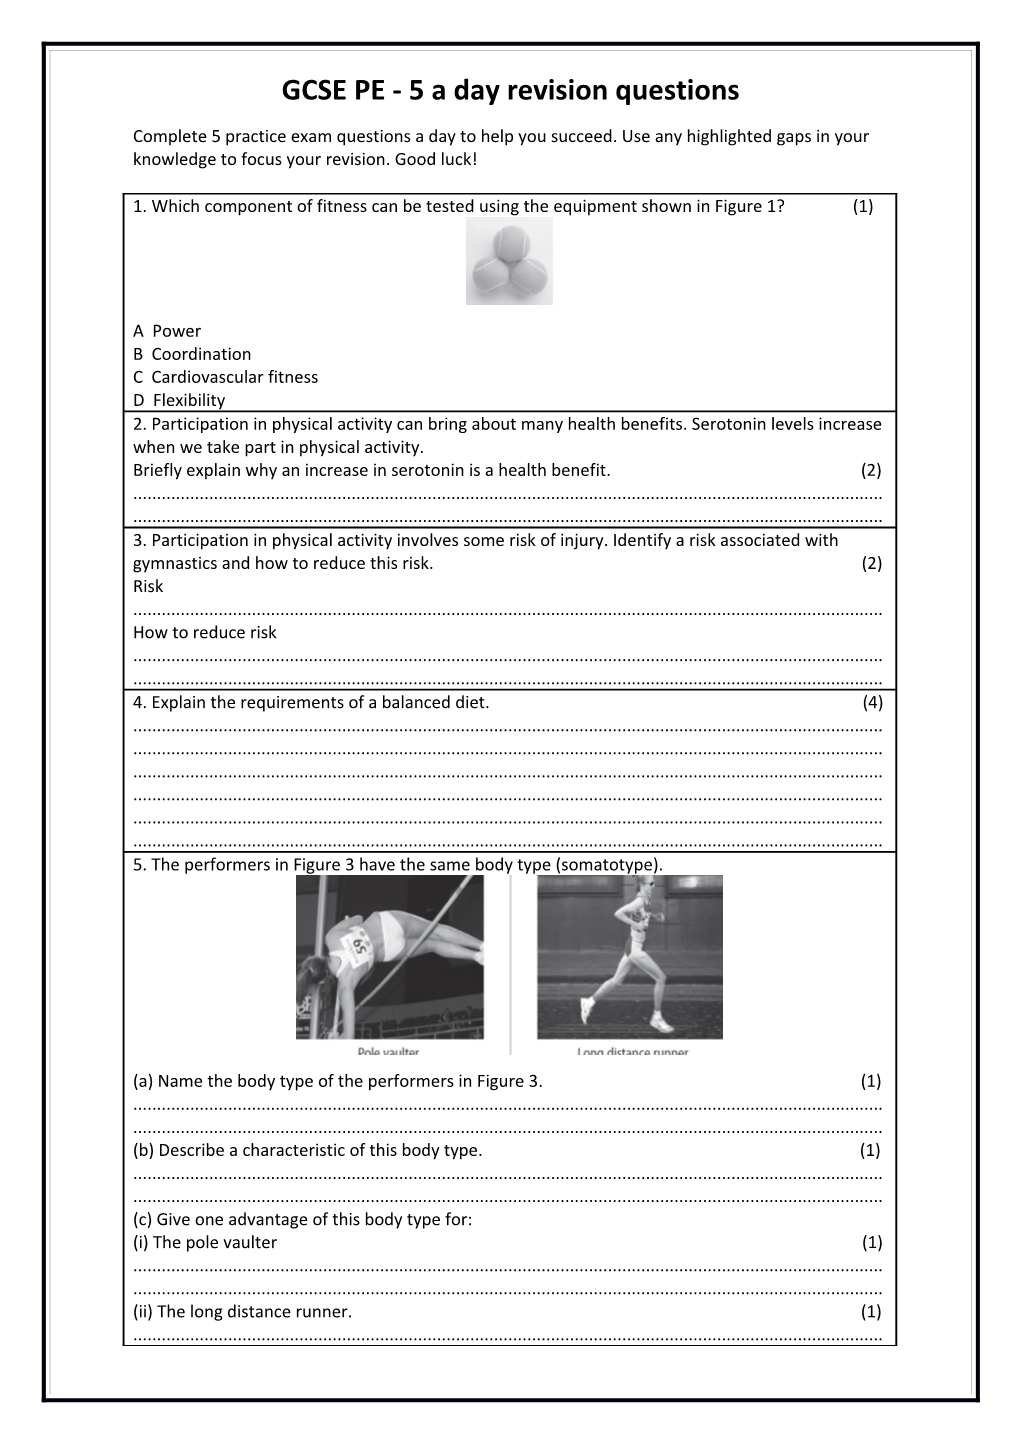 GCSE PE - 5 a Day Revision Questions